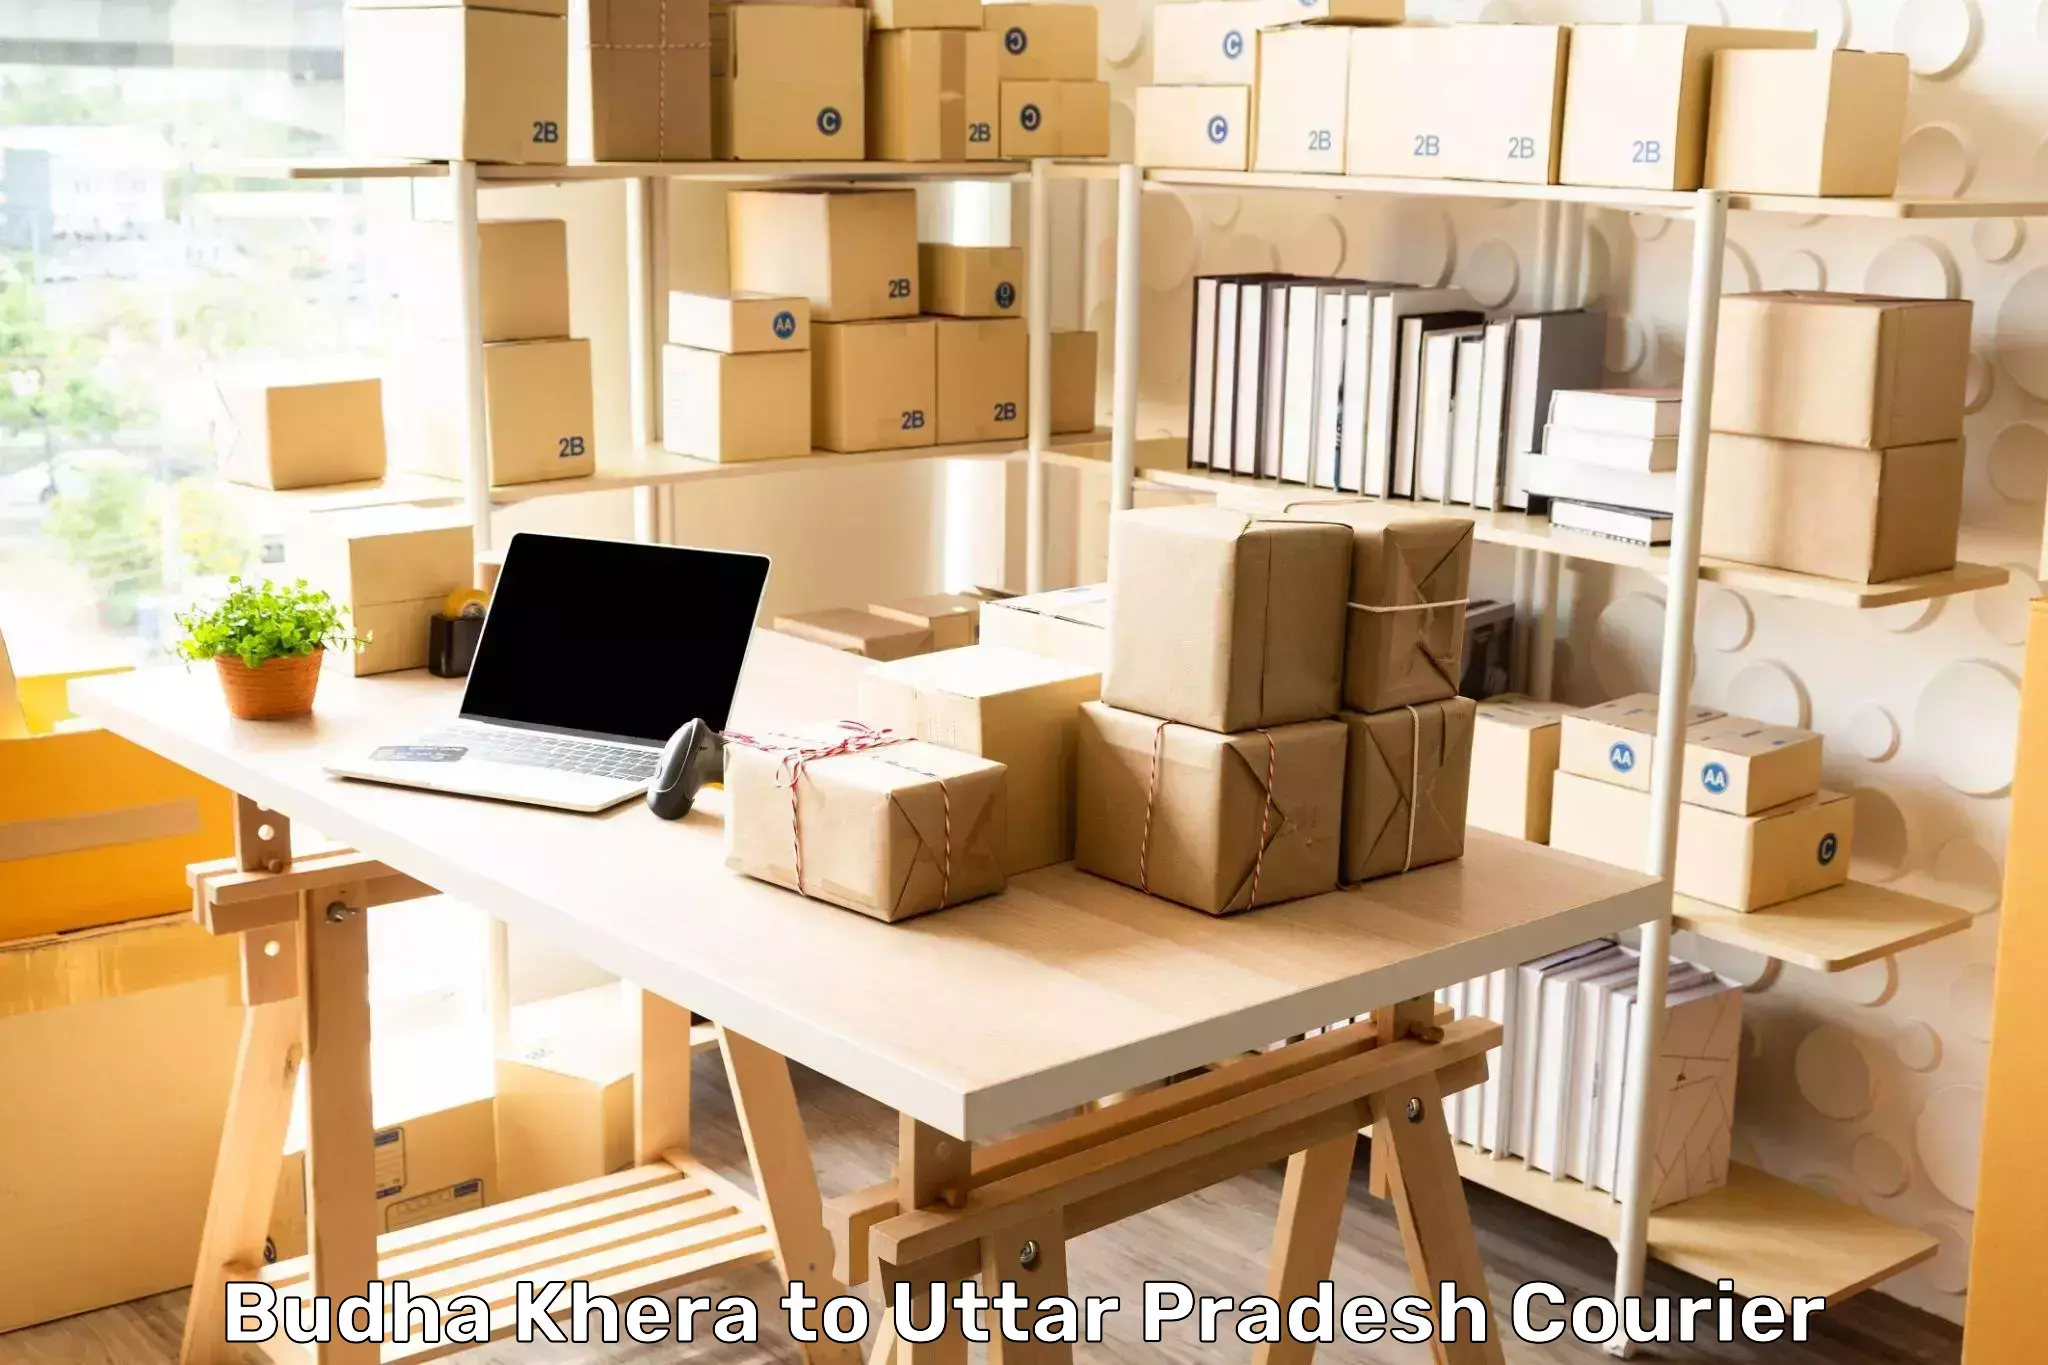 Reliable courier service in Budha Khera to Dudhinagar